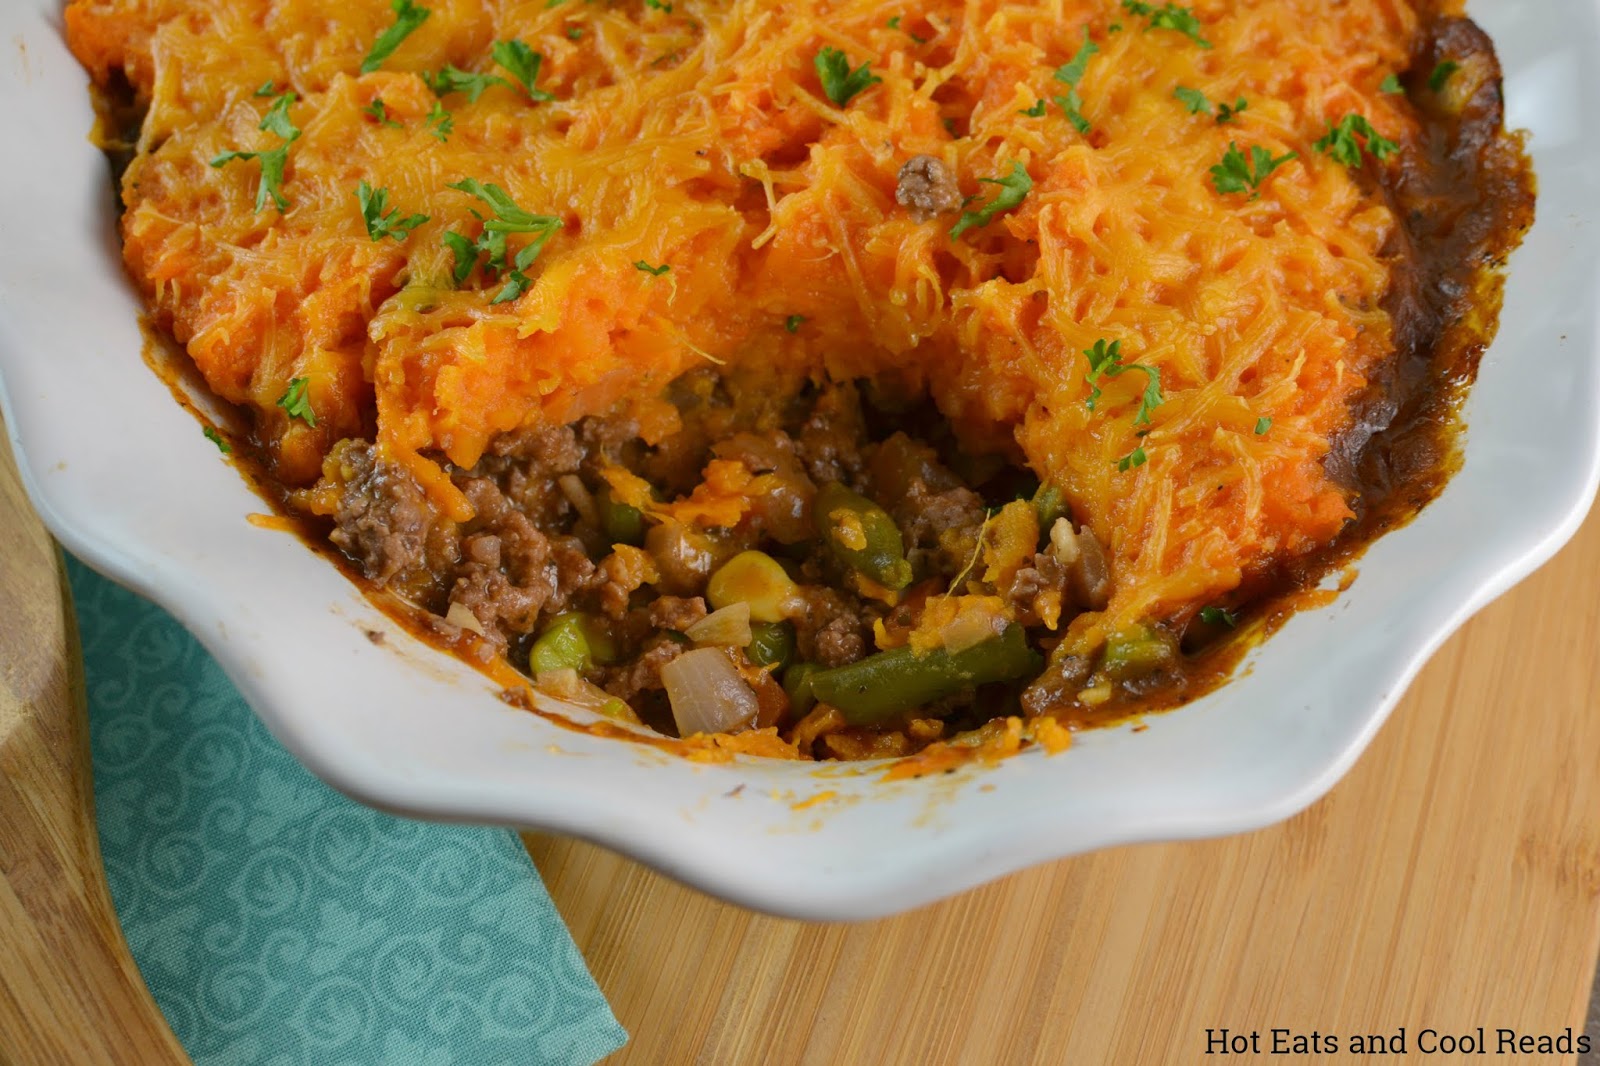 Sweet Potato Beefy Shepard's Pie Recipe from Hot Eats and Cool Reads! This comfort food casserole is perfect for dinner! Topped with delicious mashed sweet potatoes and packed with delicious ground beef and vegetables!